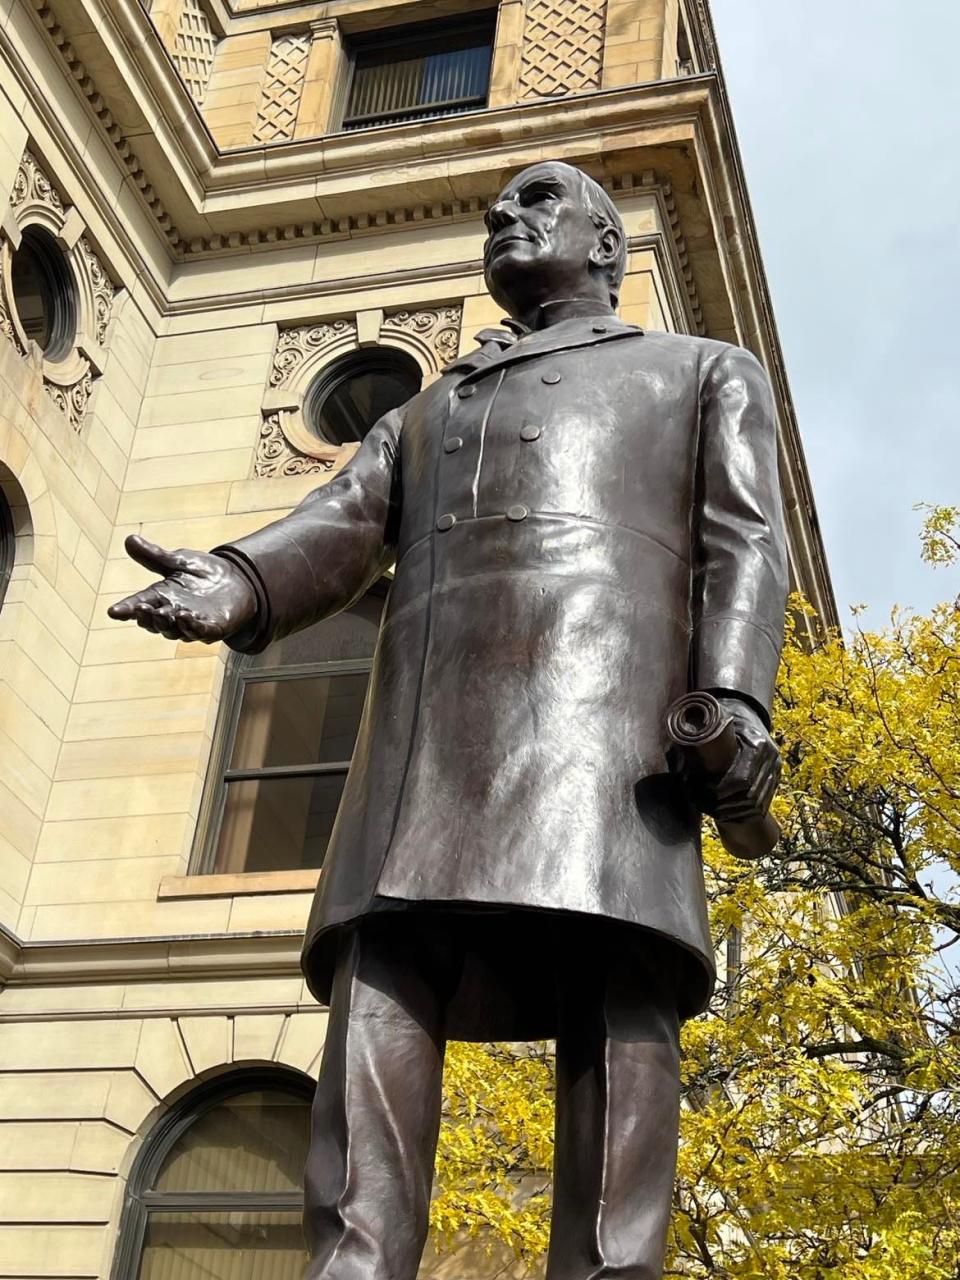 A bronze statue of President William McKinley was unveiled on Saturday in front of the Stark County Courthouse in downtown Canton. The statue was restored and relocated from Arcata, California.